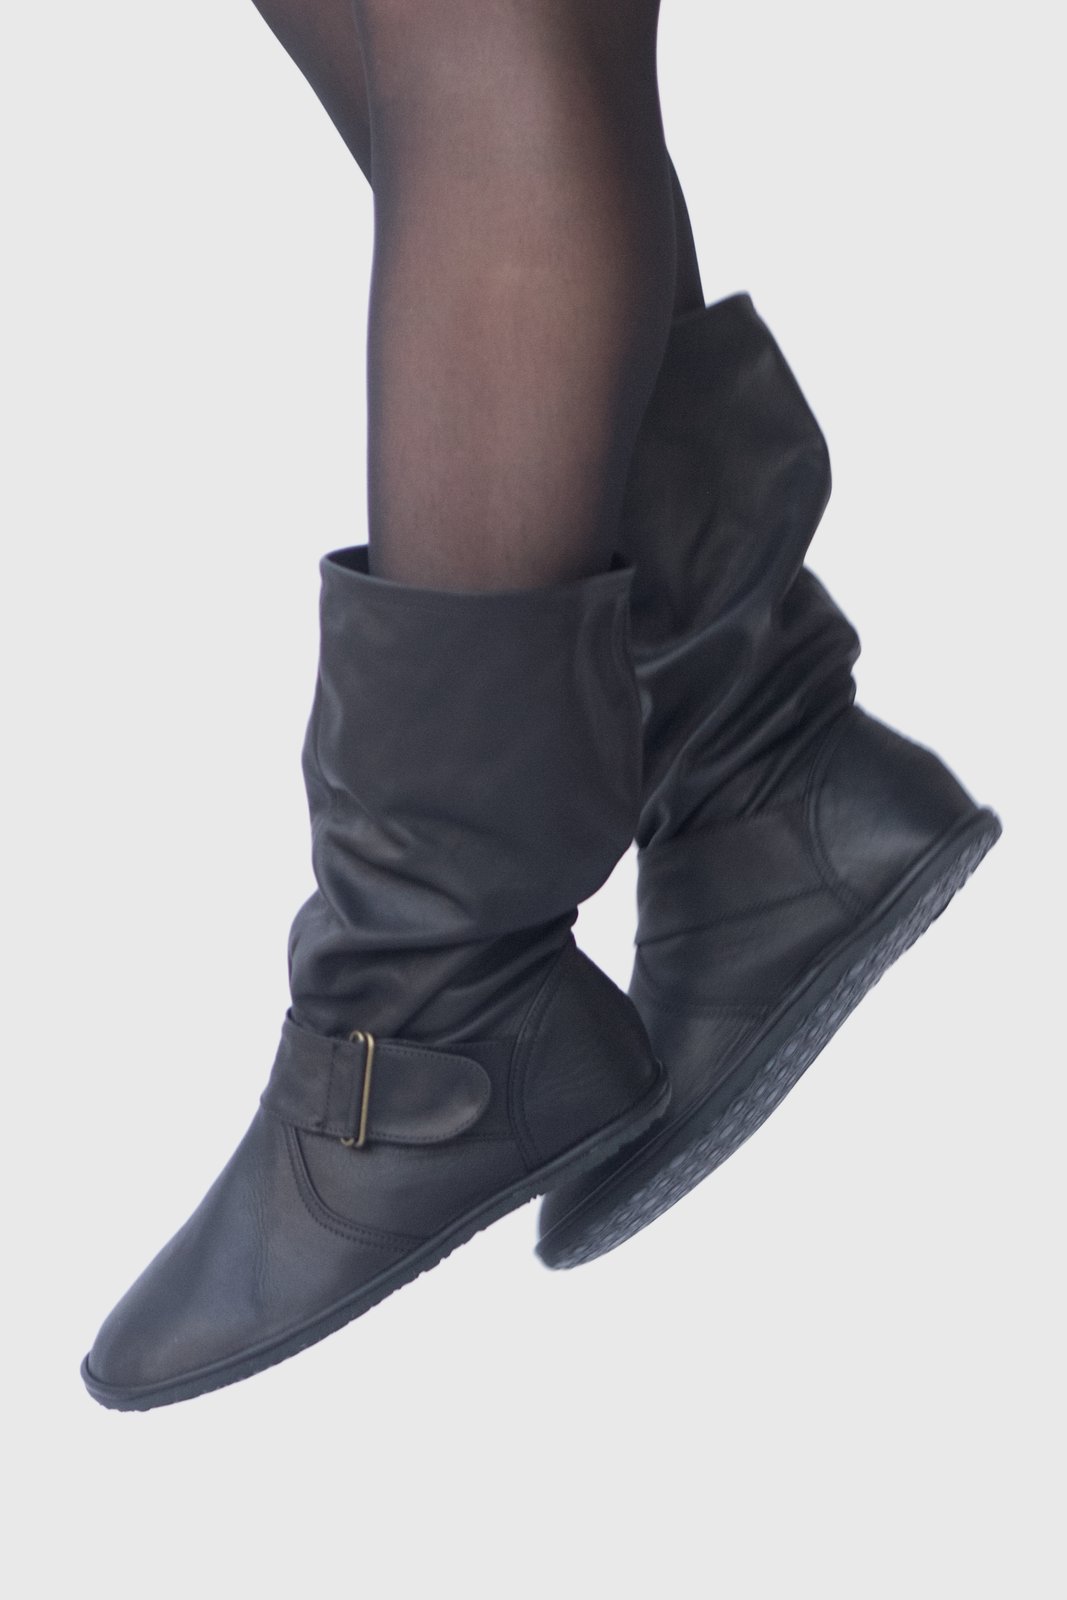 black leather slouch boots